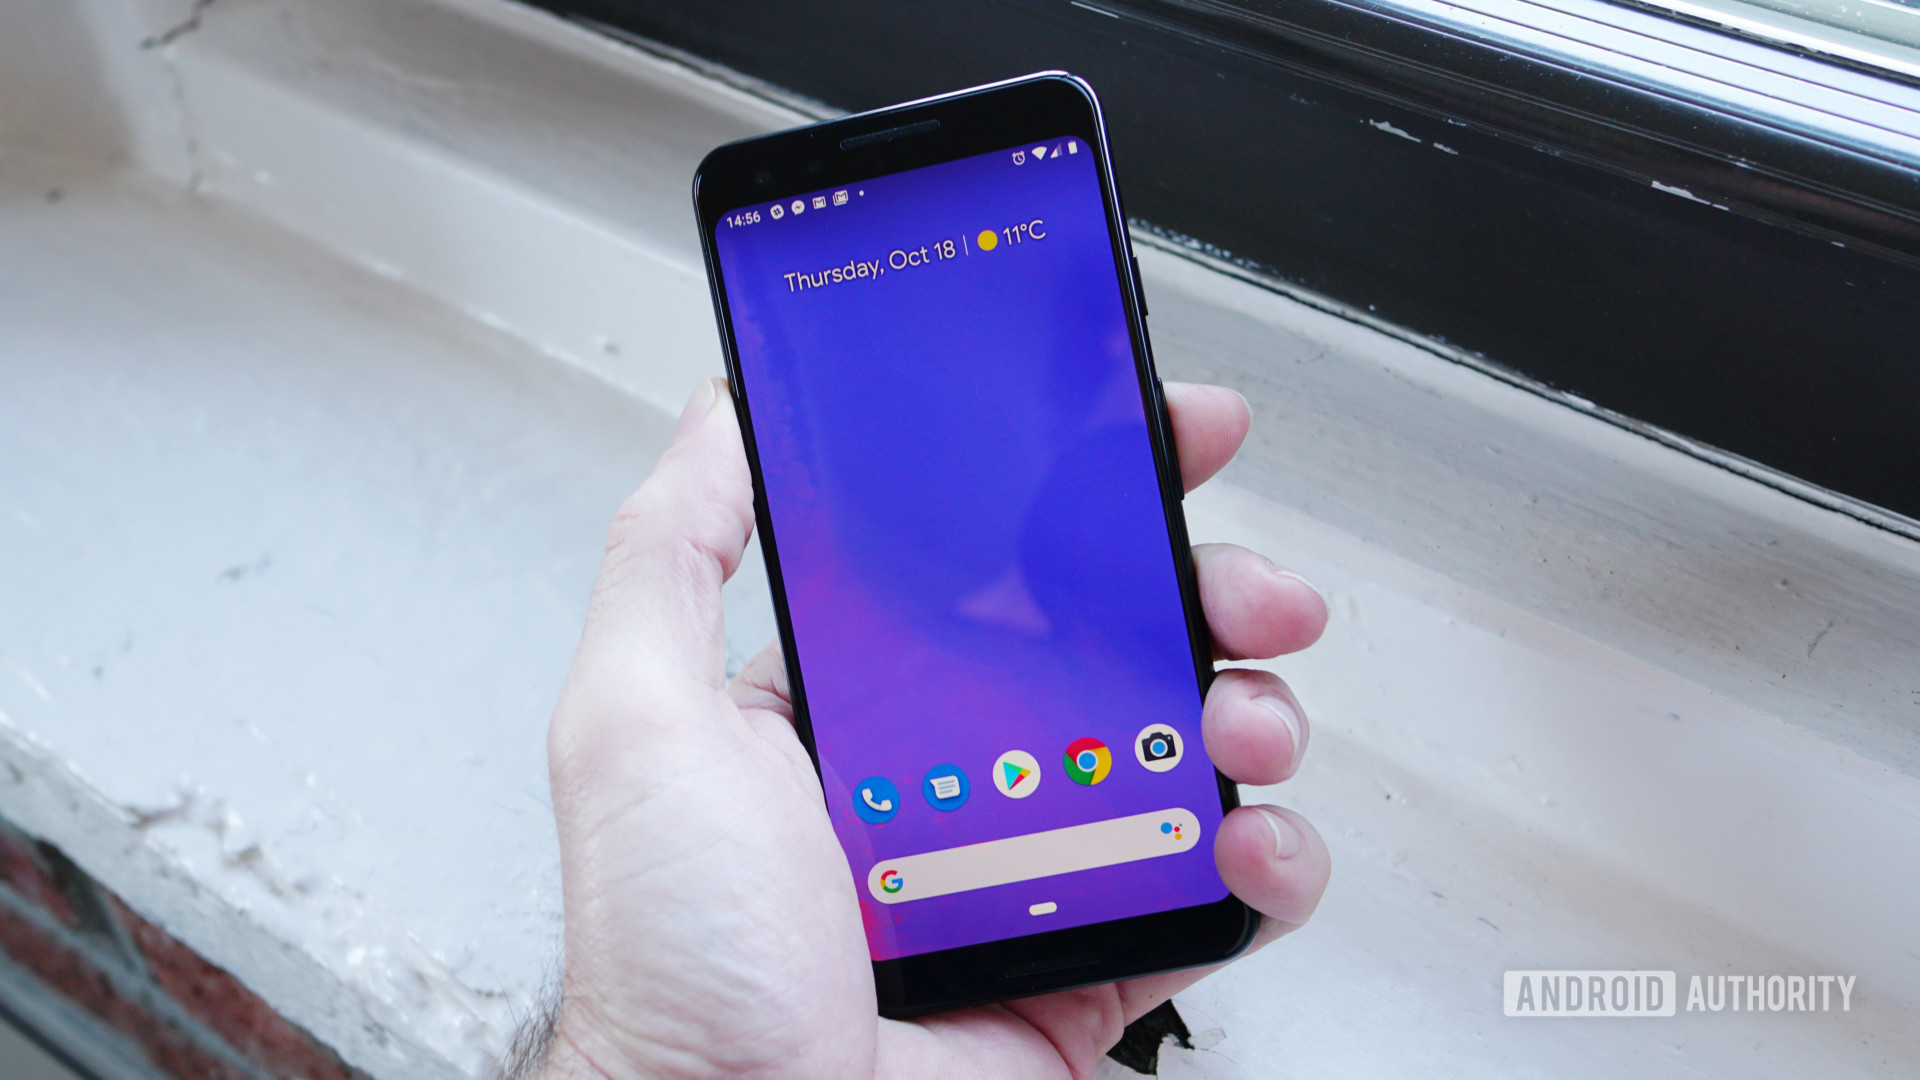 A 120Hz LCD screen was considered for the Google Pixel 3.